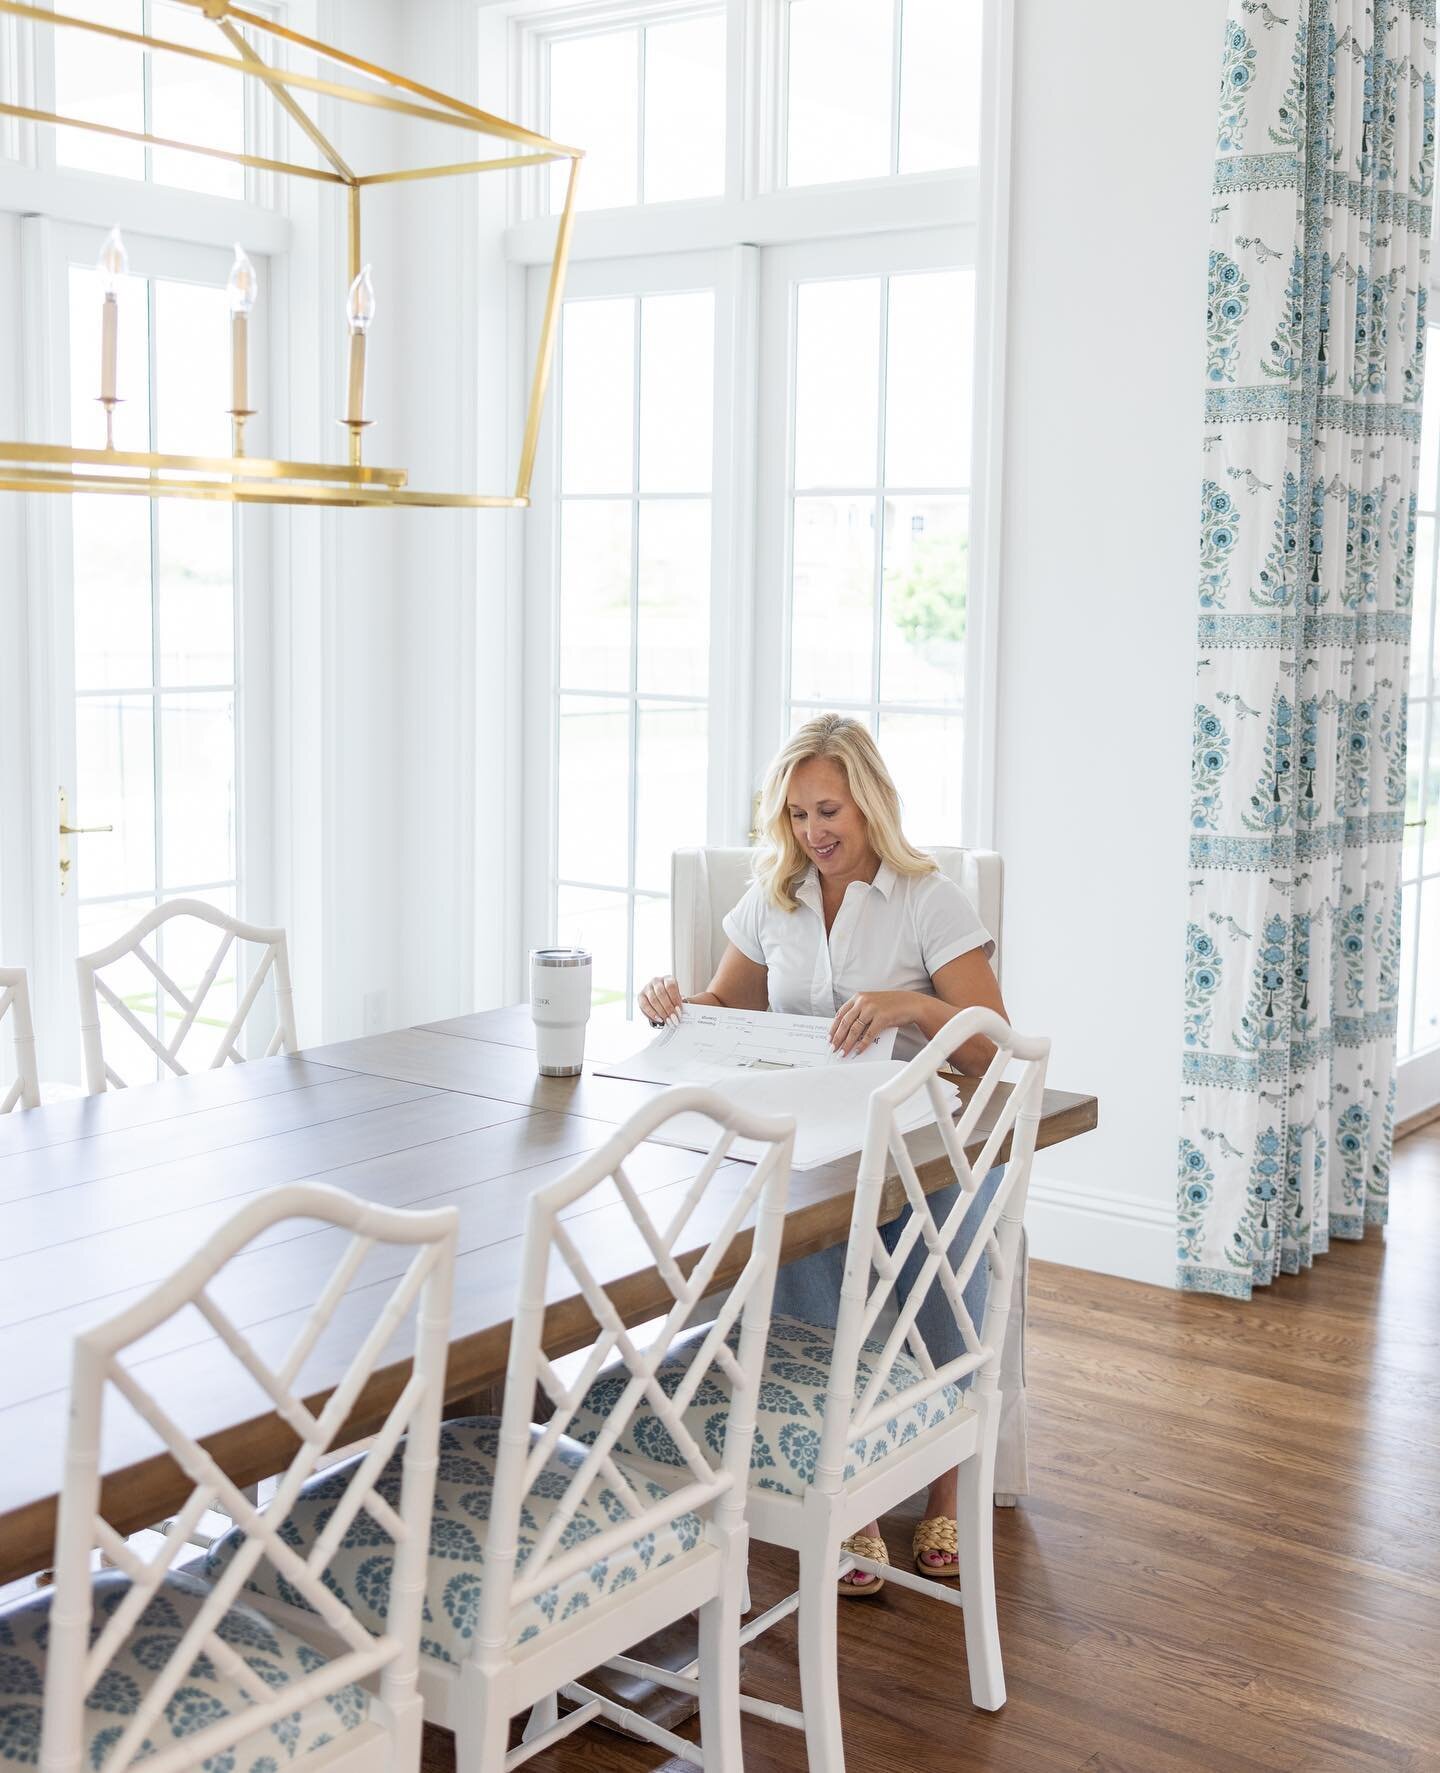 Prepping the final touches for Project Paraiso 💛 I can't wait to show you the final product of this stunning home. ⁠
⁠
#interiordesign #interiordesigner #interiordesignjupiter #interiordesignpalmbeach #diningroom #diningroomdesign #diningroomdecor